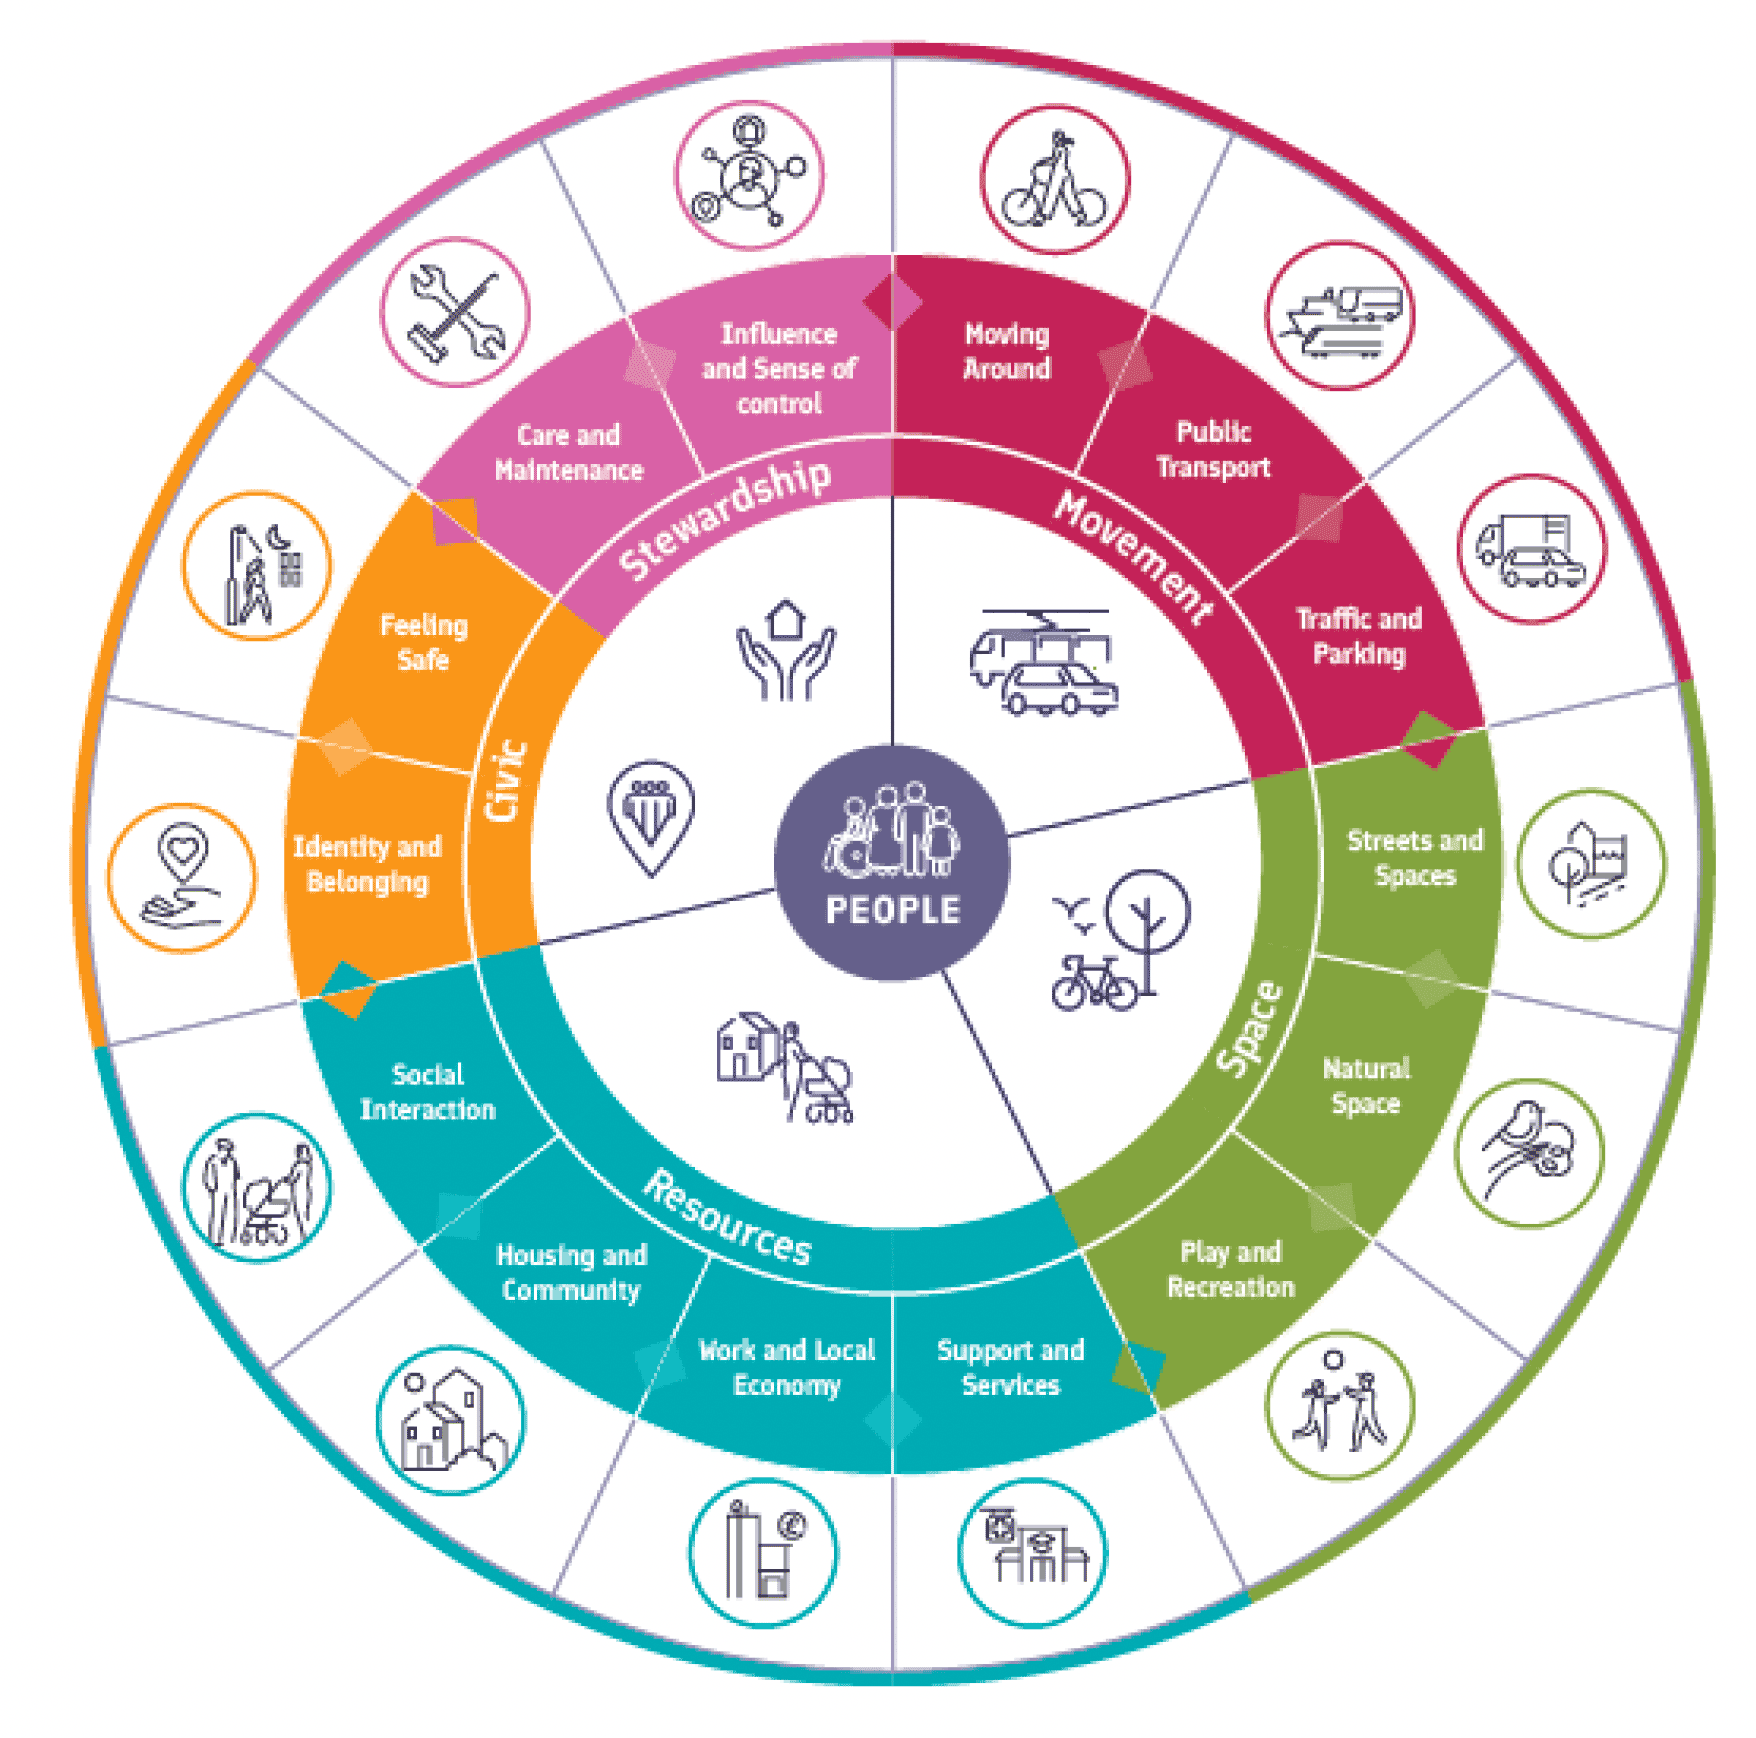 Colourful circular graphic with 'people' at centre, showing connections to spaces, movement, stewardship, civic and resources.